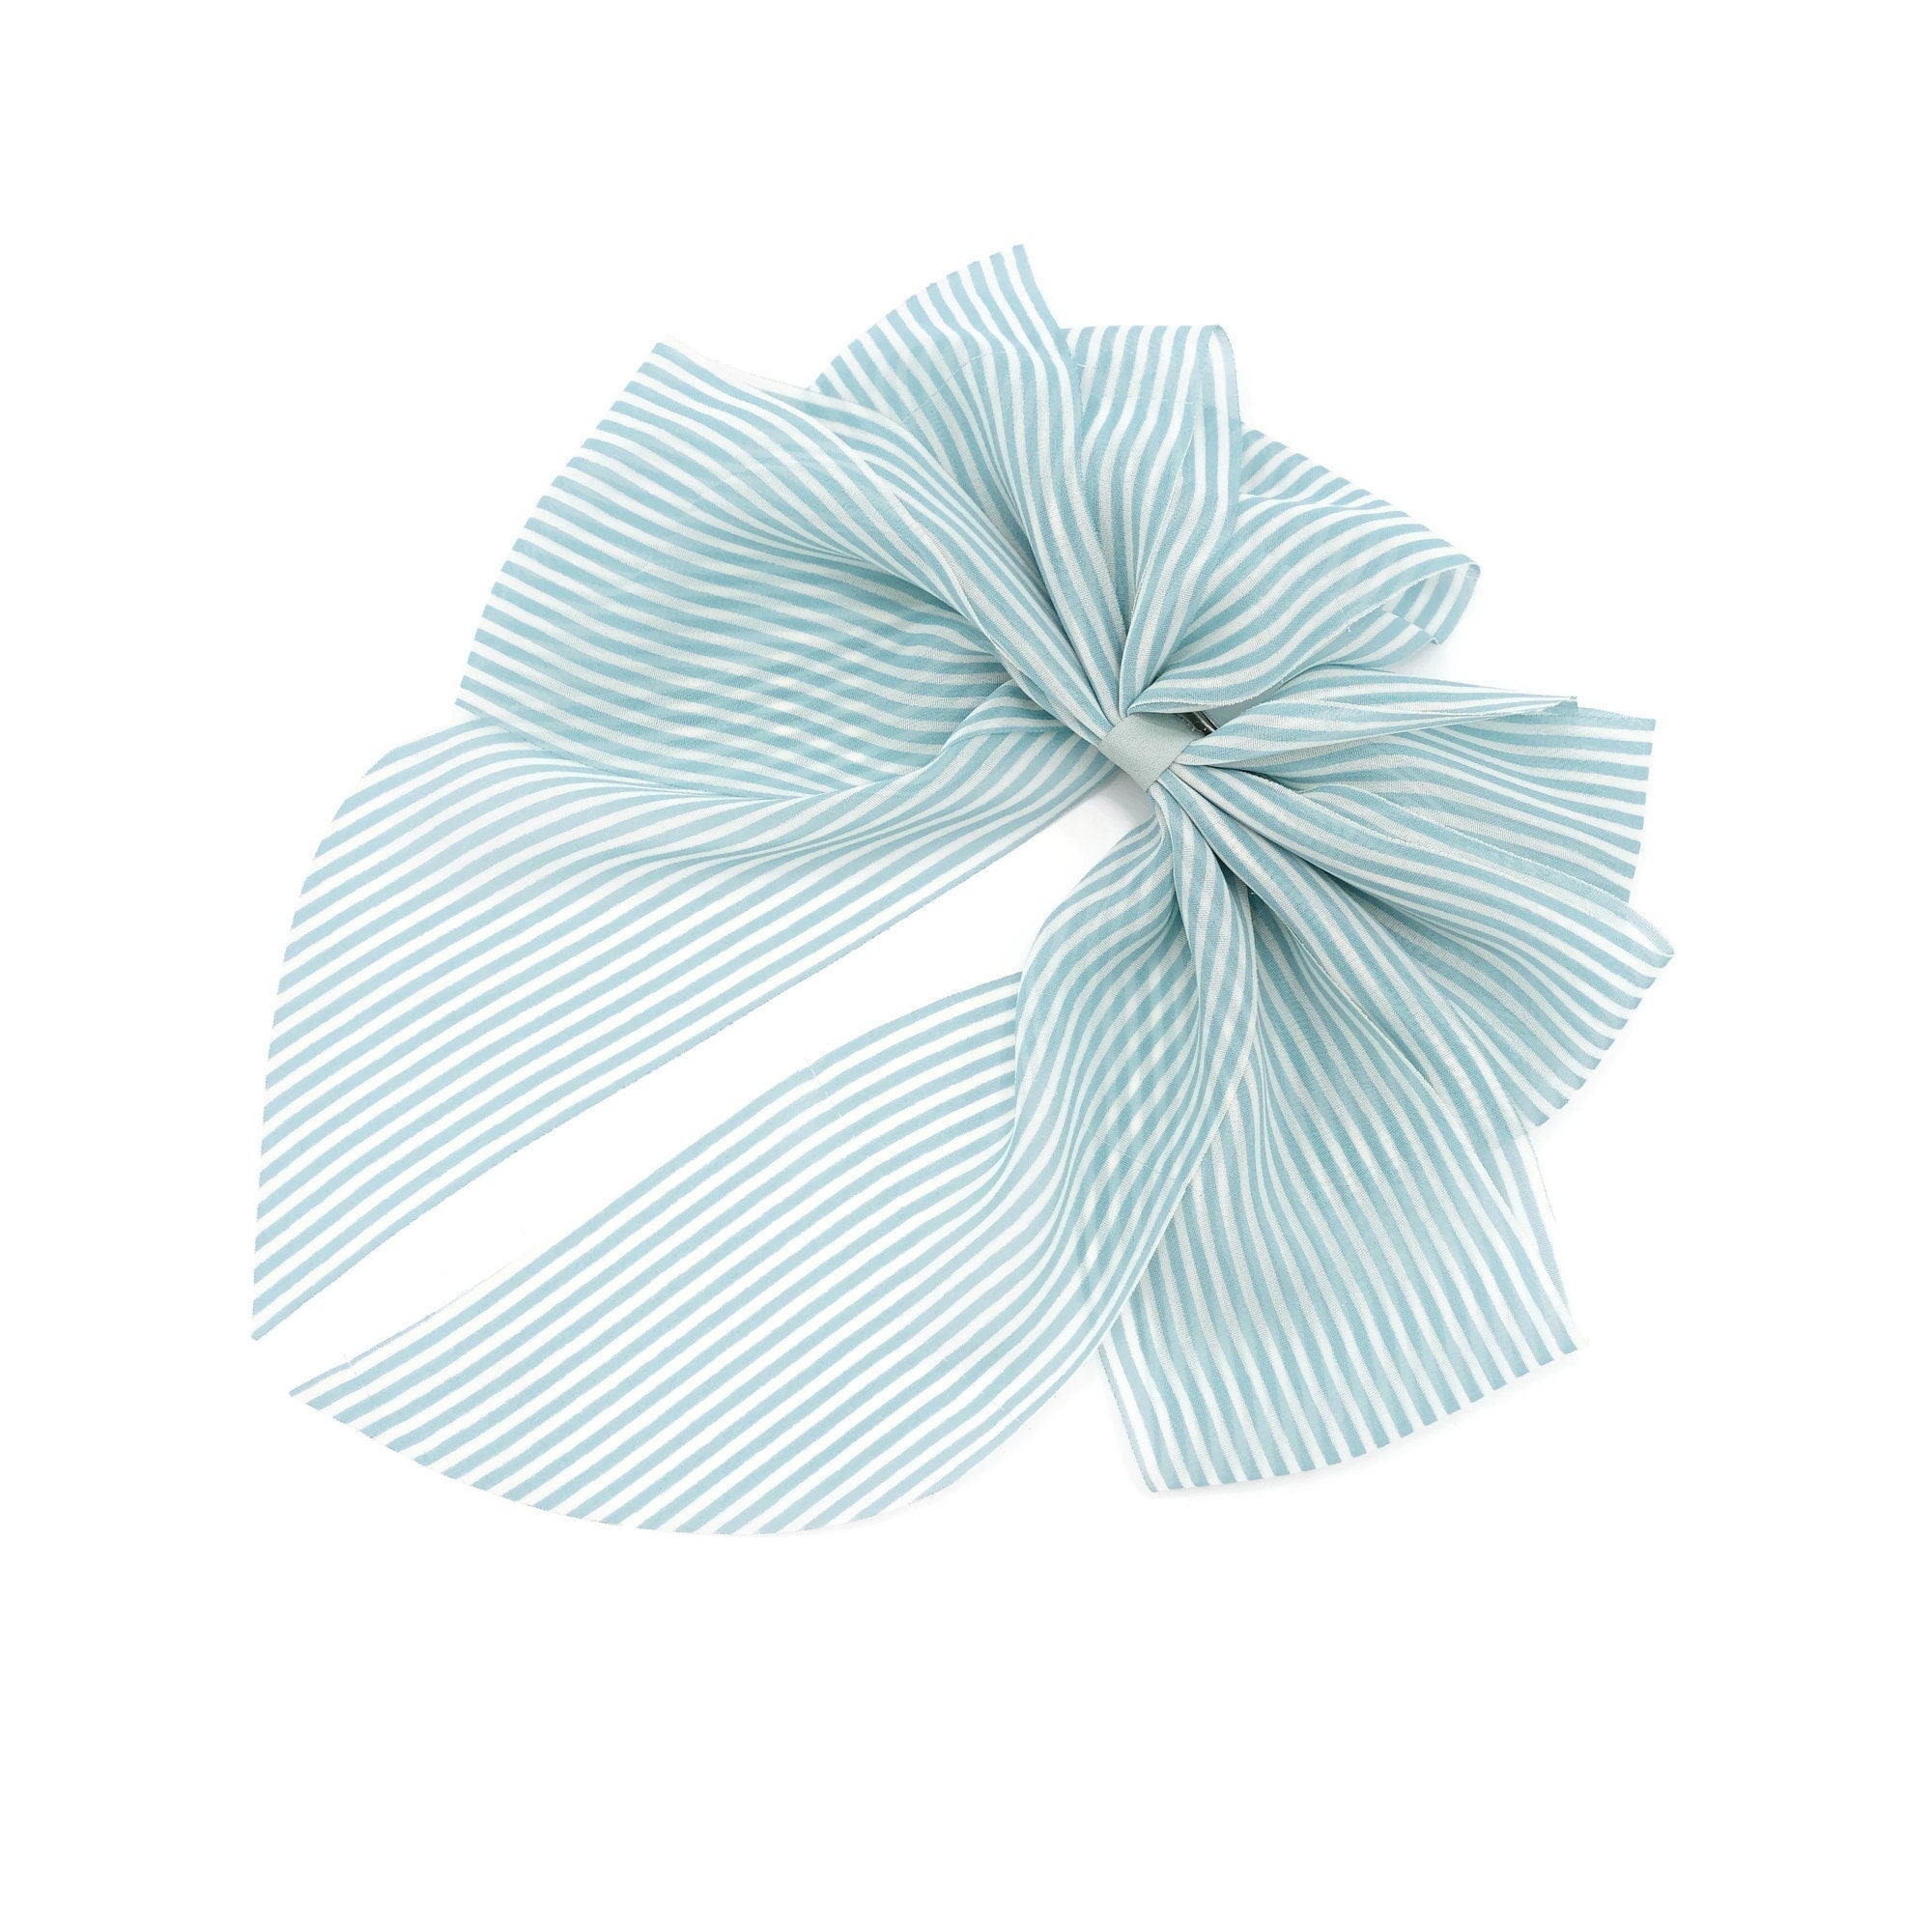 VeryShine Barrette (Bow) Mint green narrow stripe hair bow layered style tail hair accessory for women